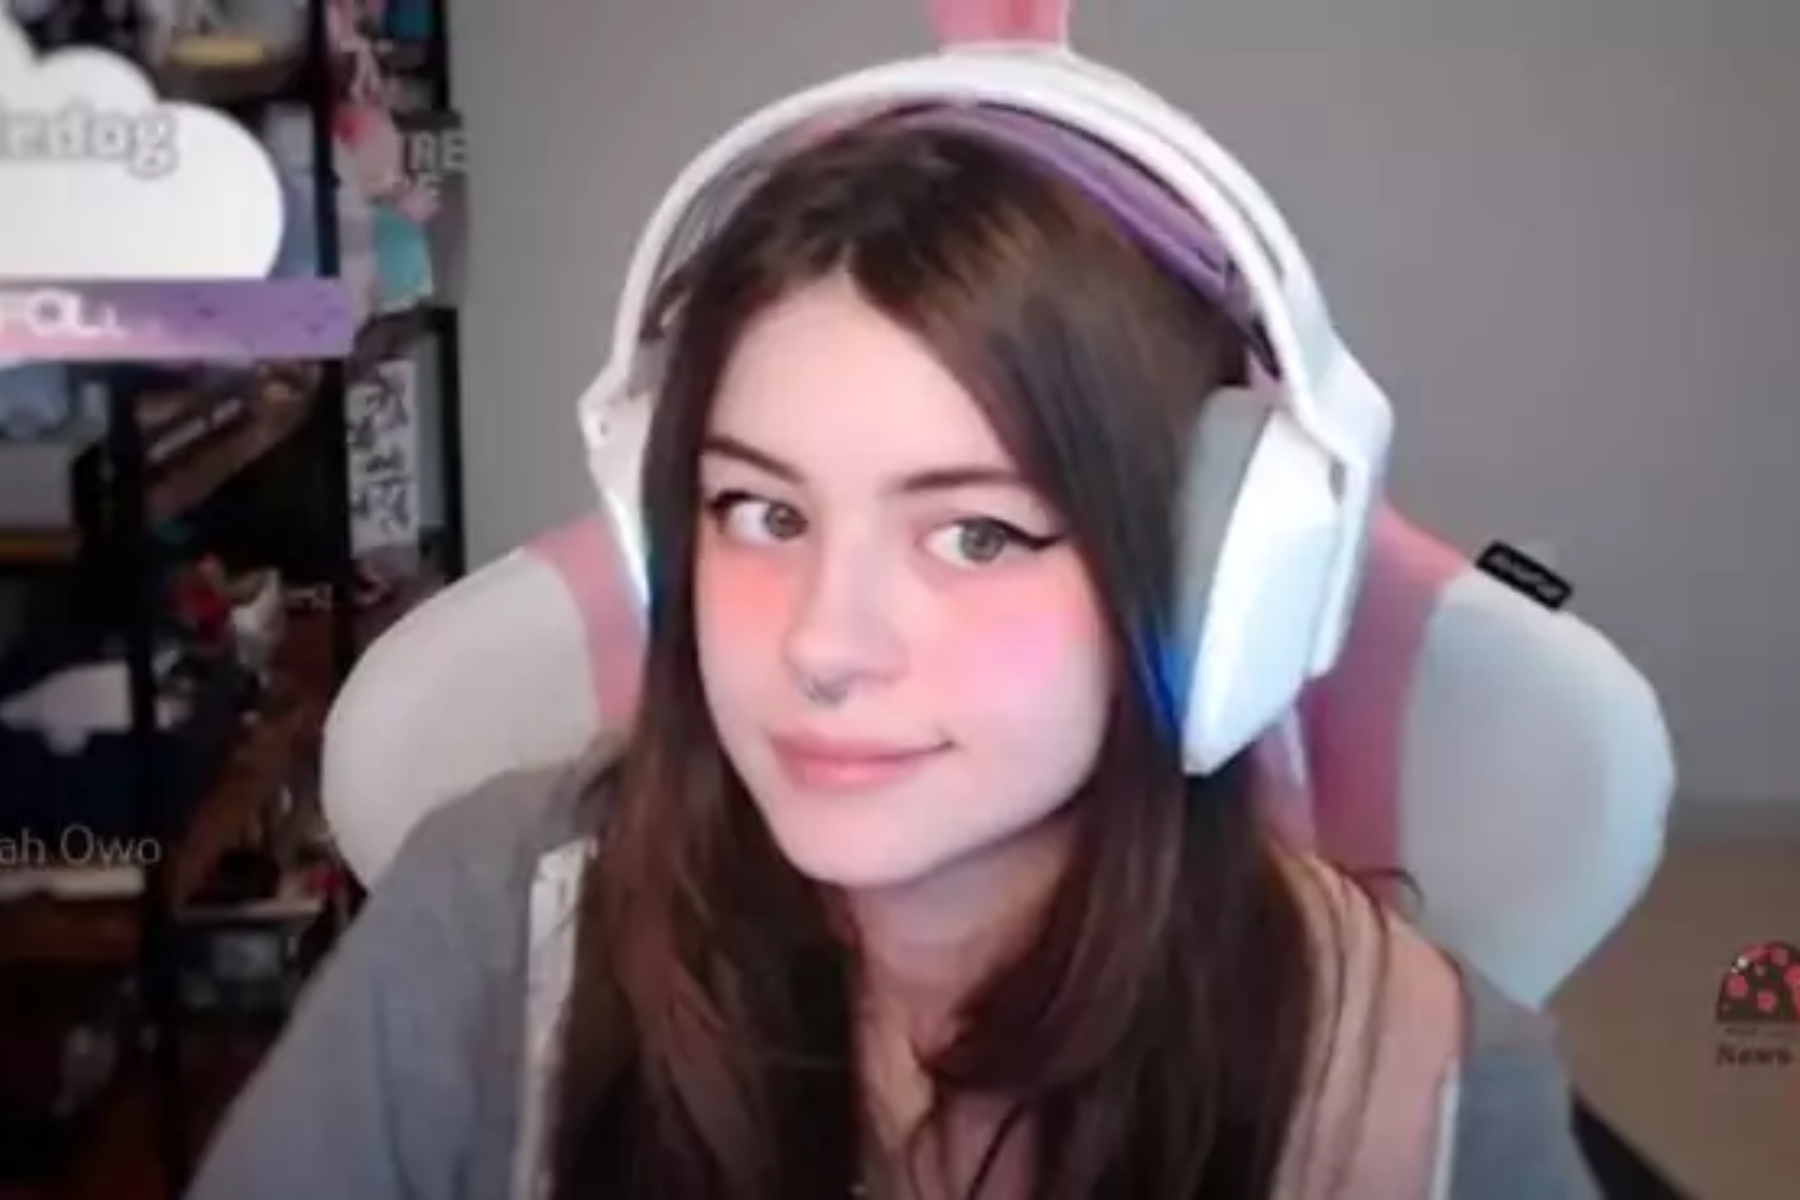 Hannah Owo is wearing headphones and sitting on a pink and white gaming chair during her Twitch live stream